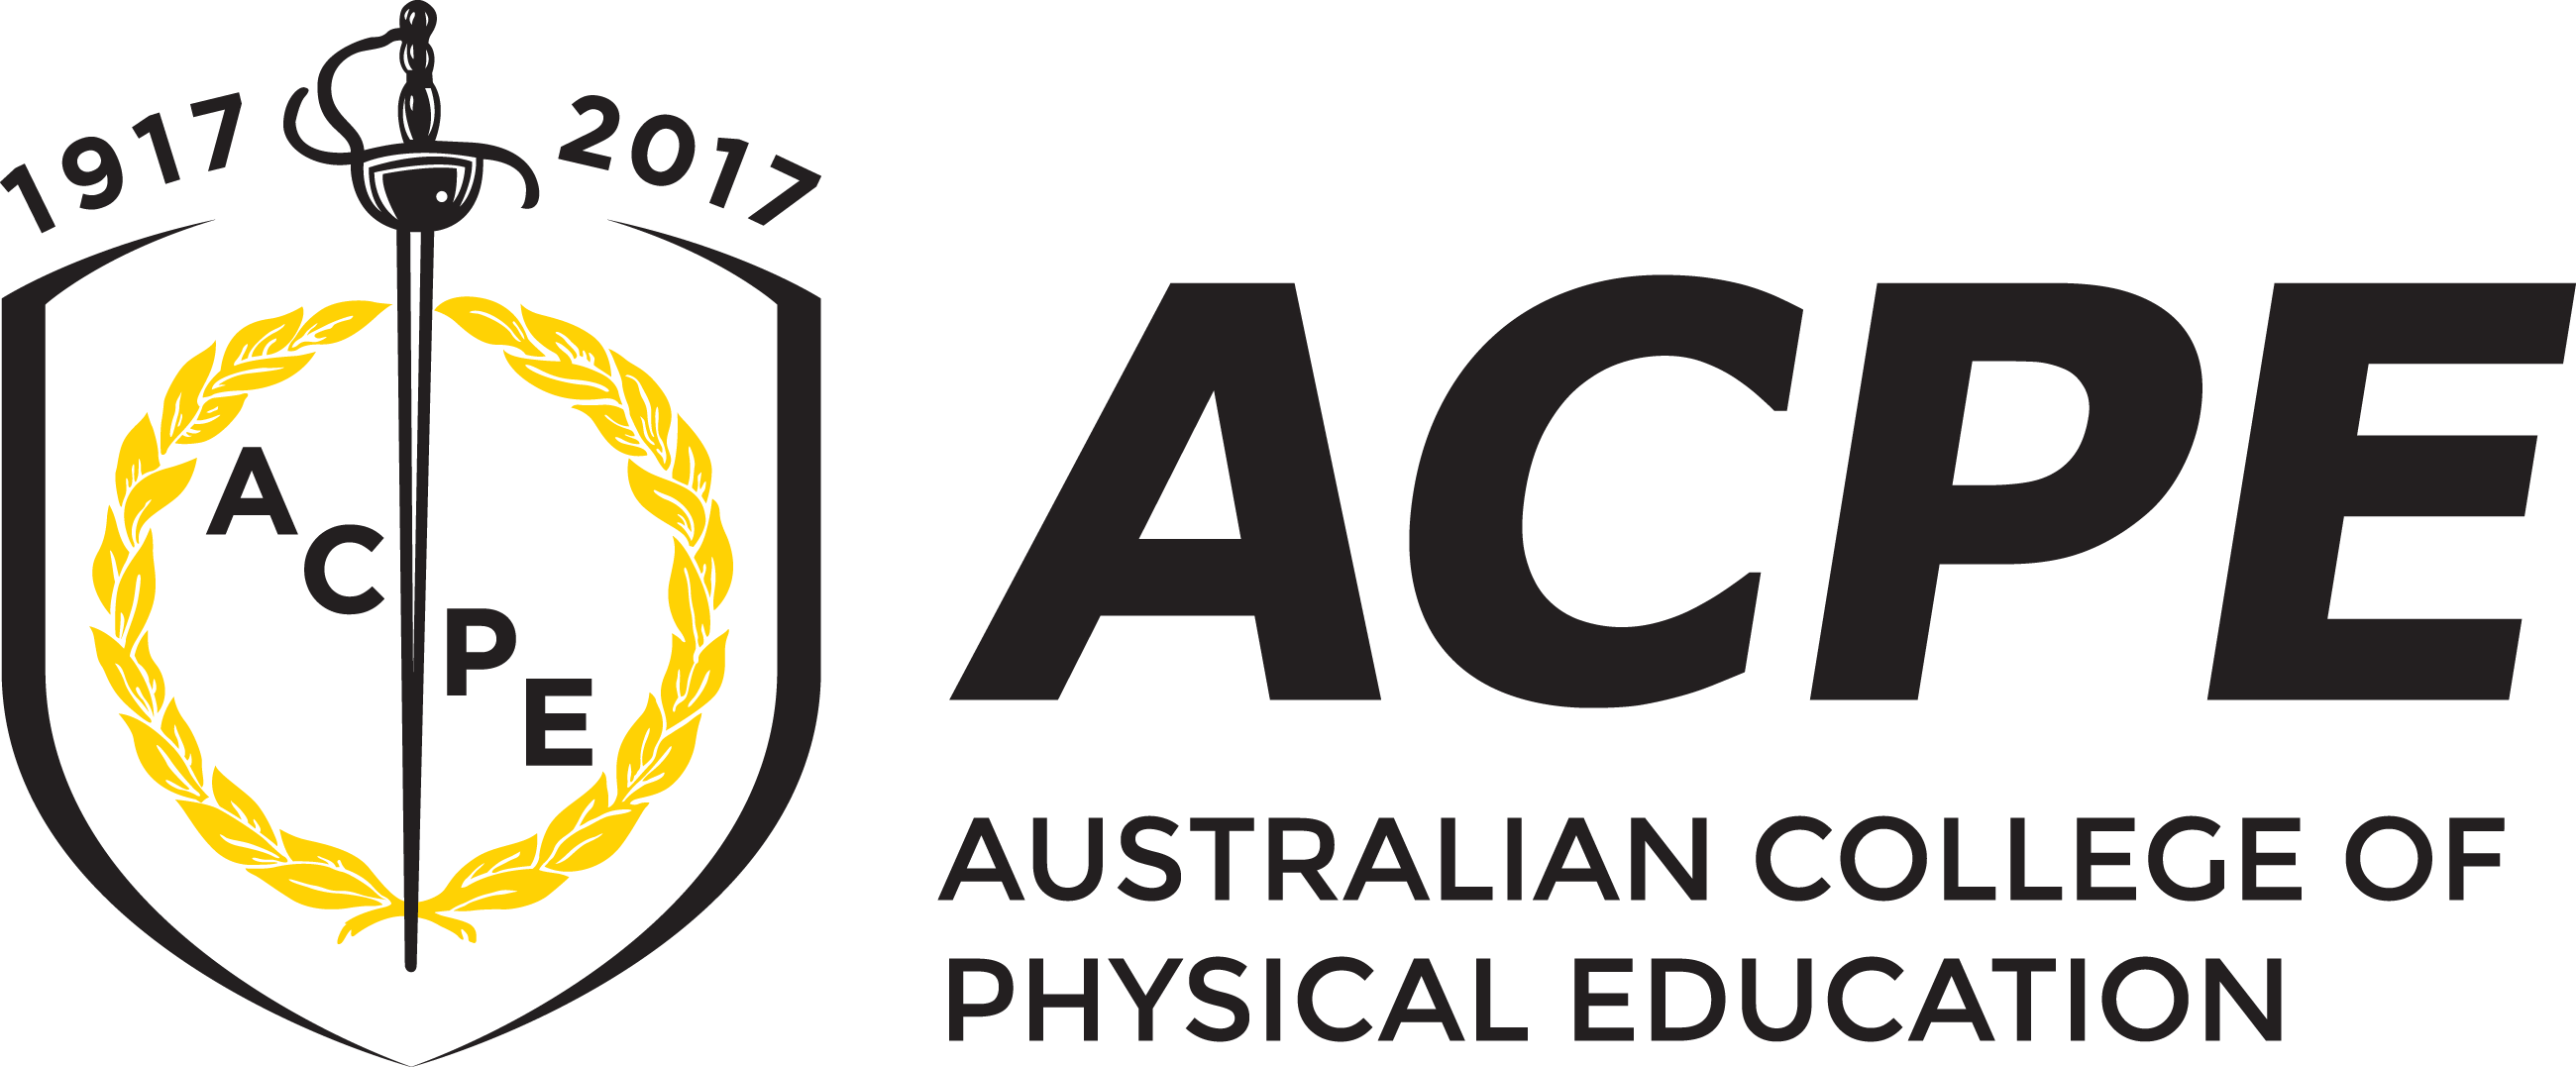 Australian College Of Physical Education - Australian College Of Physical Education Acpe (2600x1077), Png Download